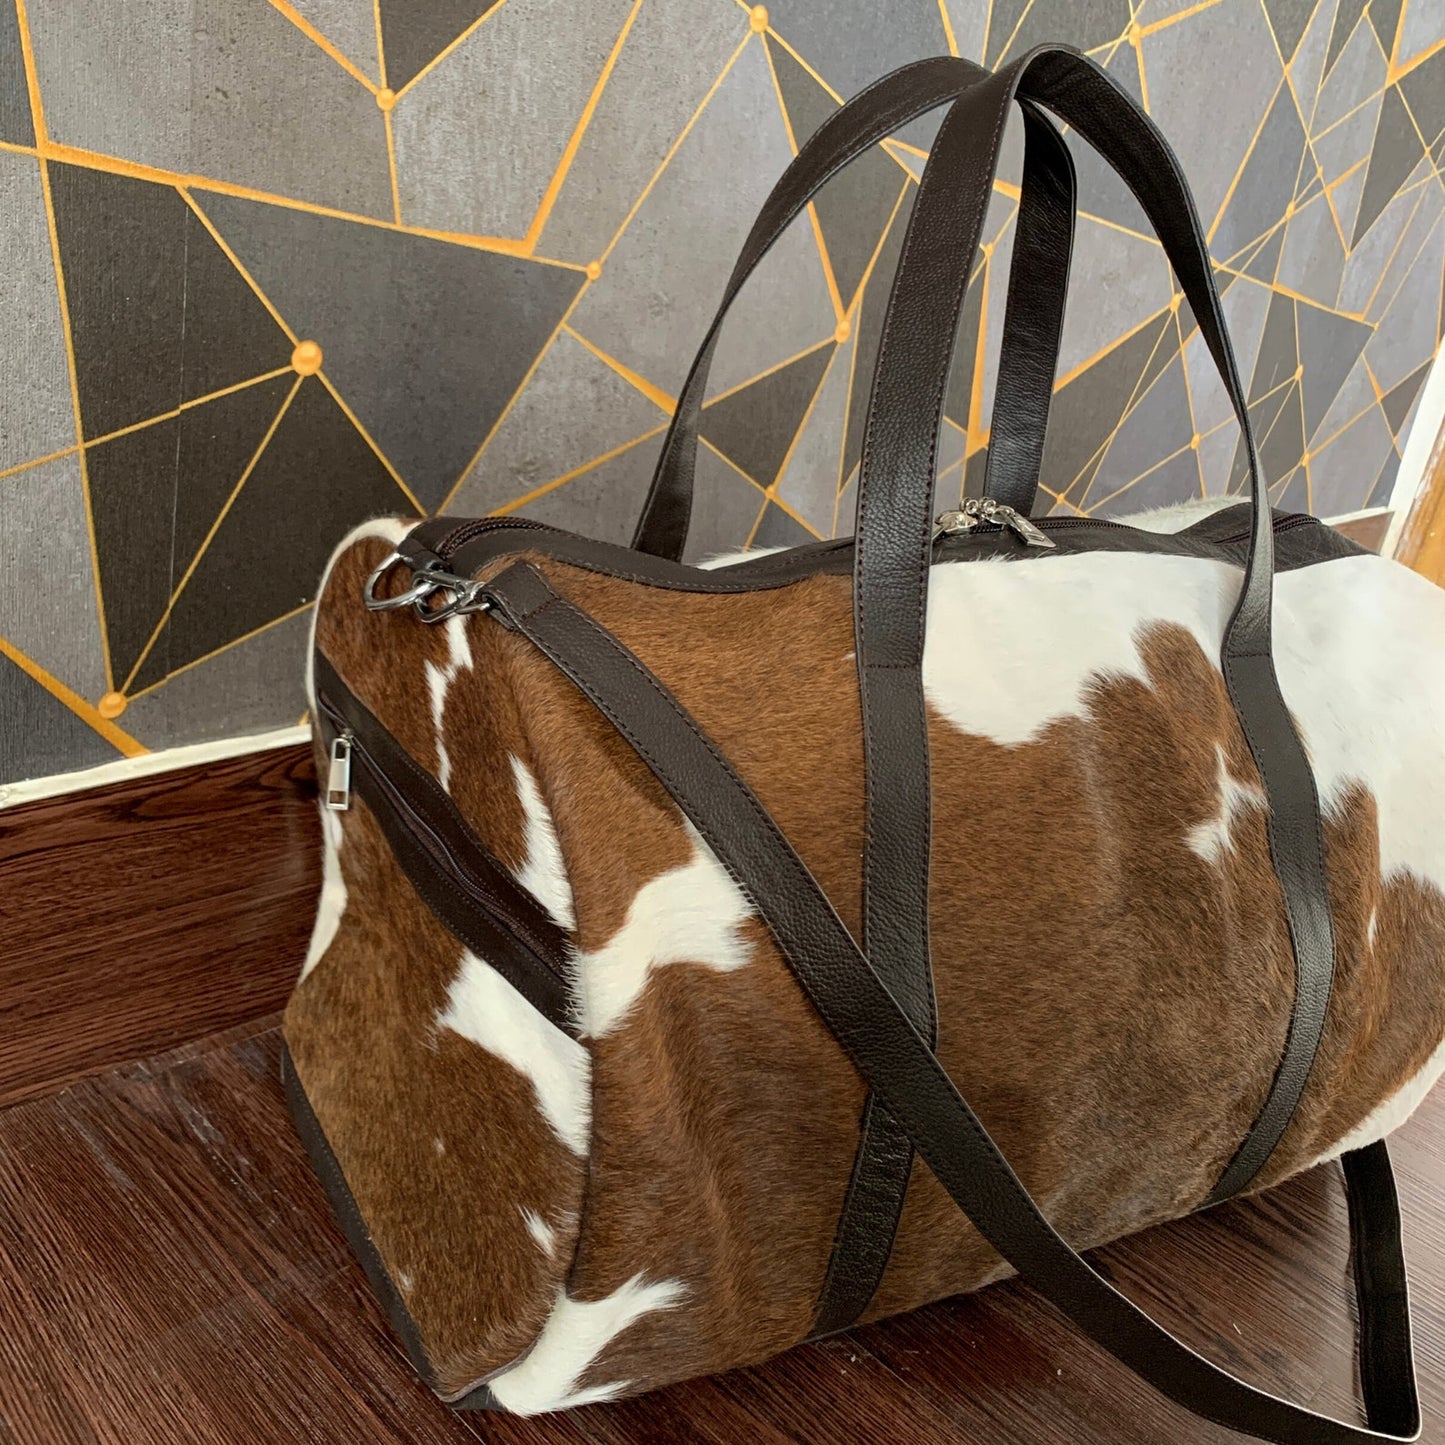 Durable cowhide duffle bag for your on-the-go lifestyle. Ready to go.